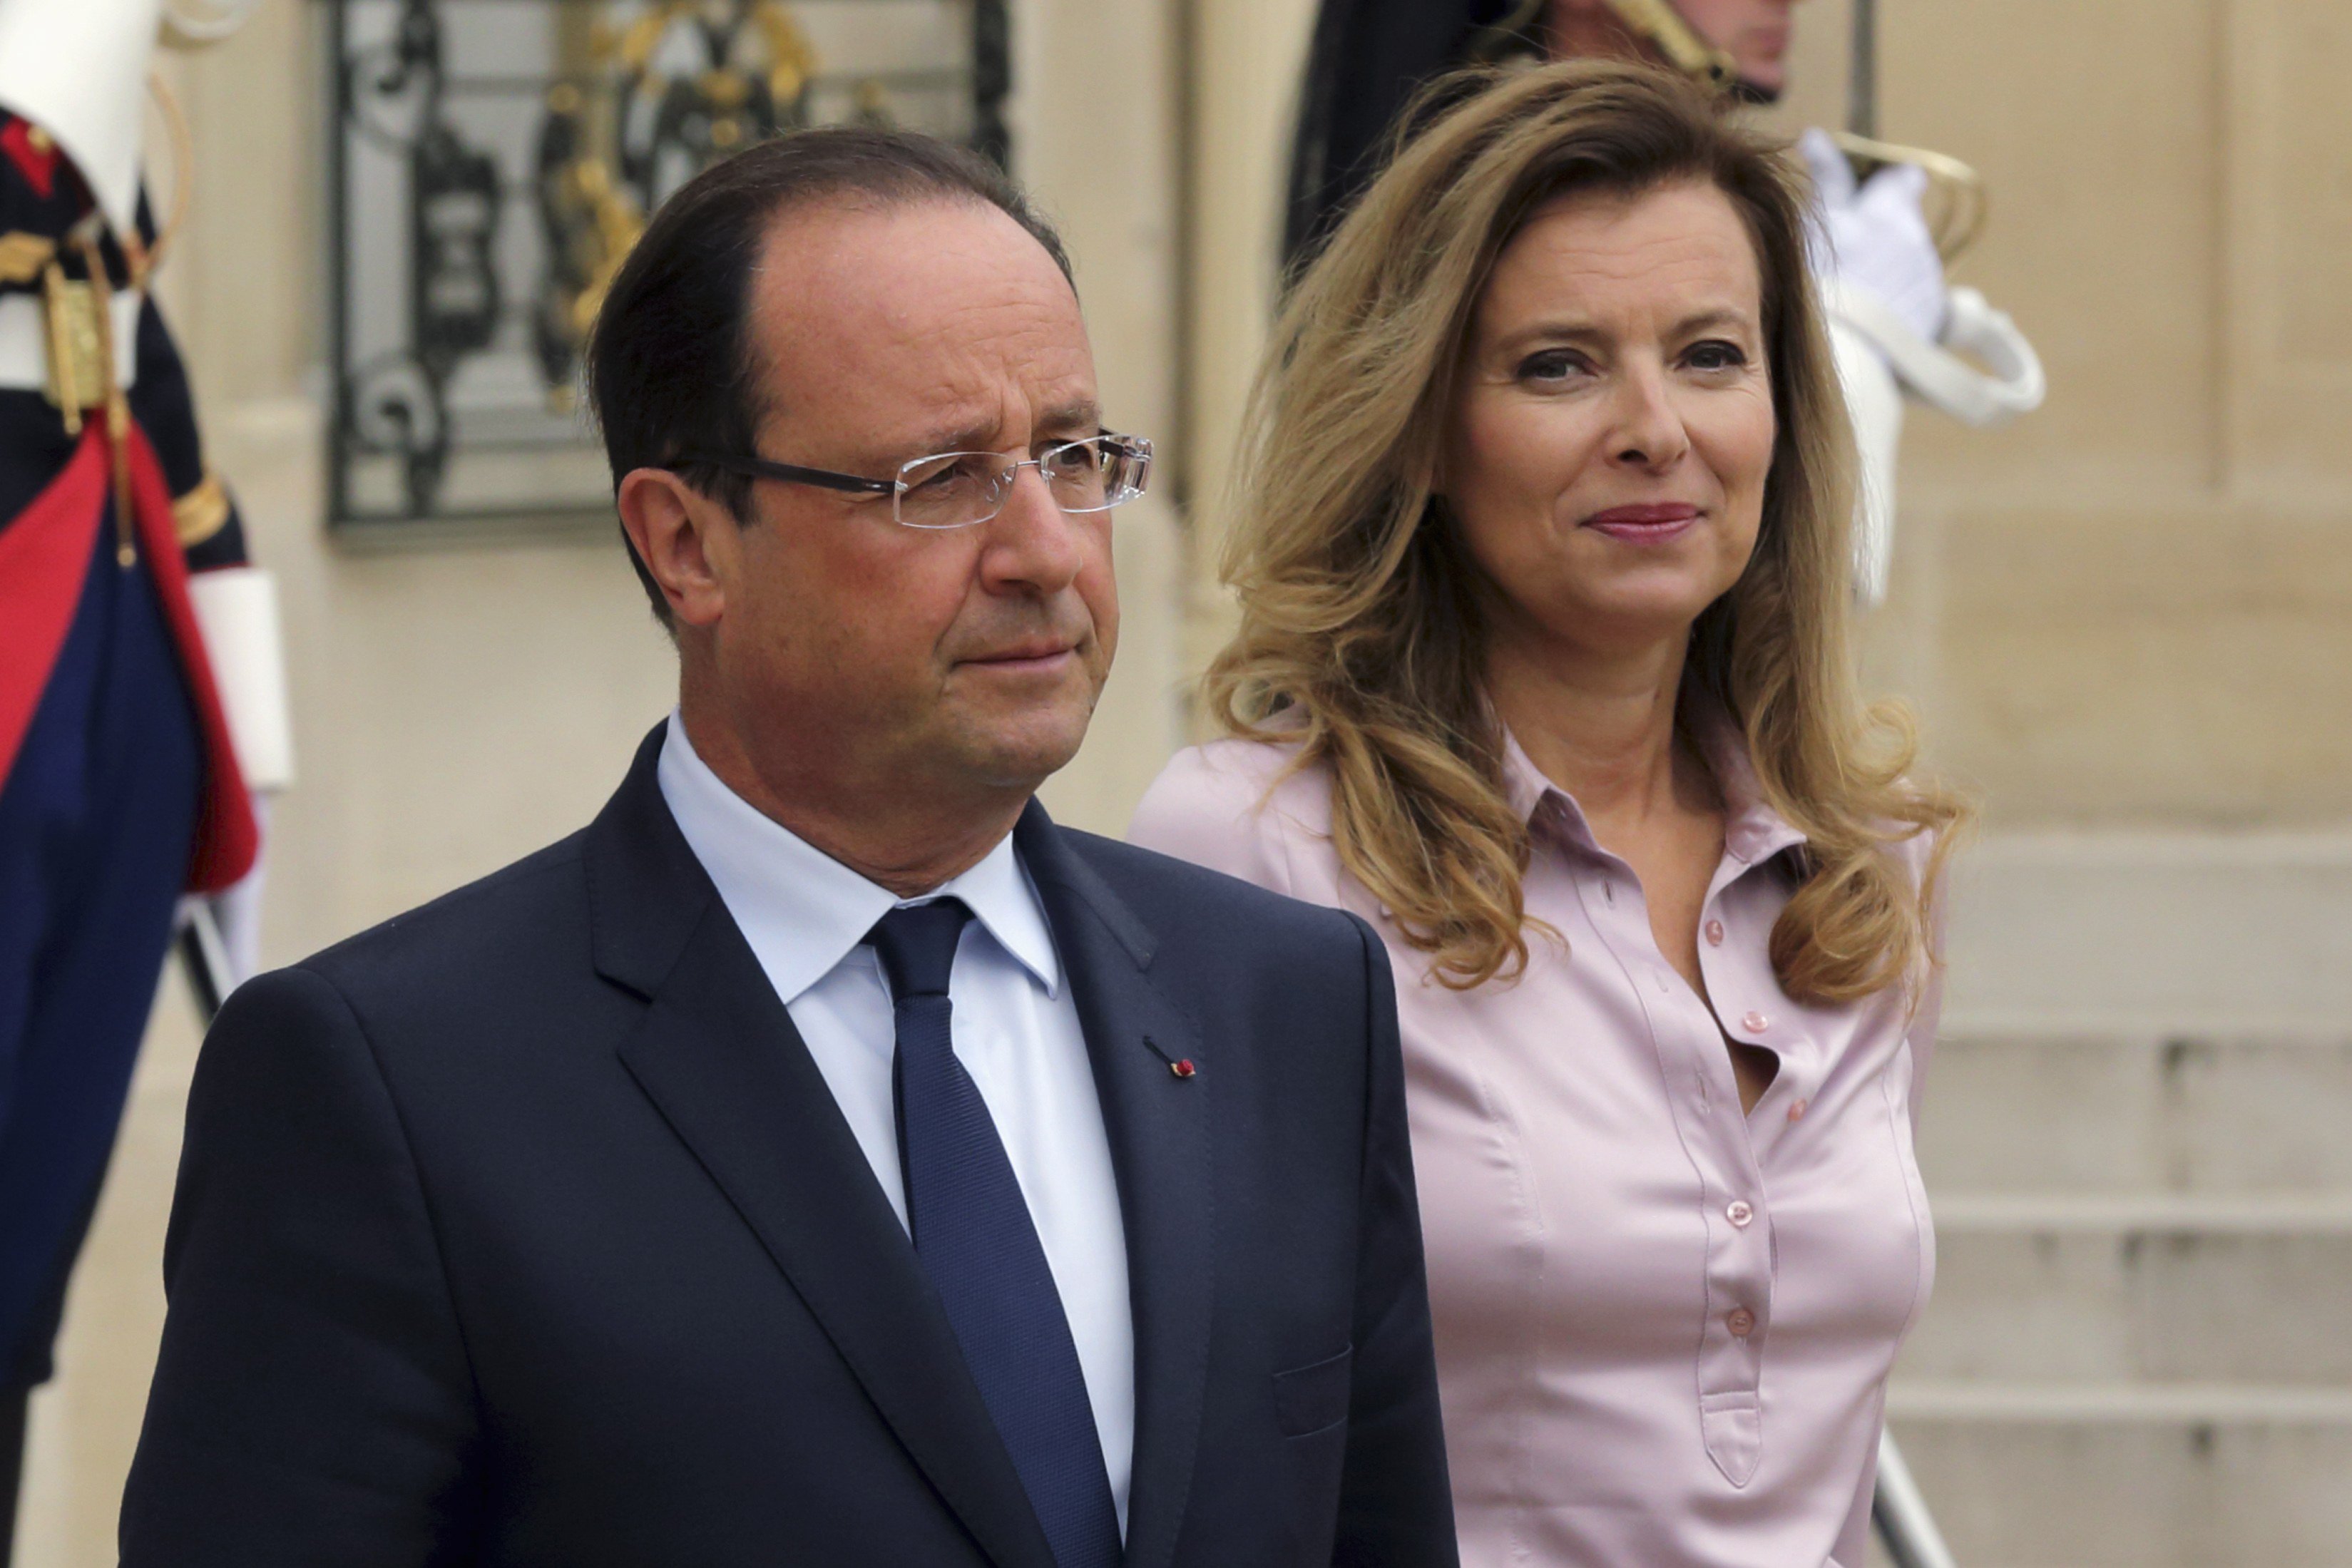 French President François Hollande and Valérie Trierweiler accompany guests following a meeting at the Élysée Palace in Paris on Oct. 1, 2013 (Philippe Wojazer / Reuters)